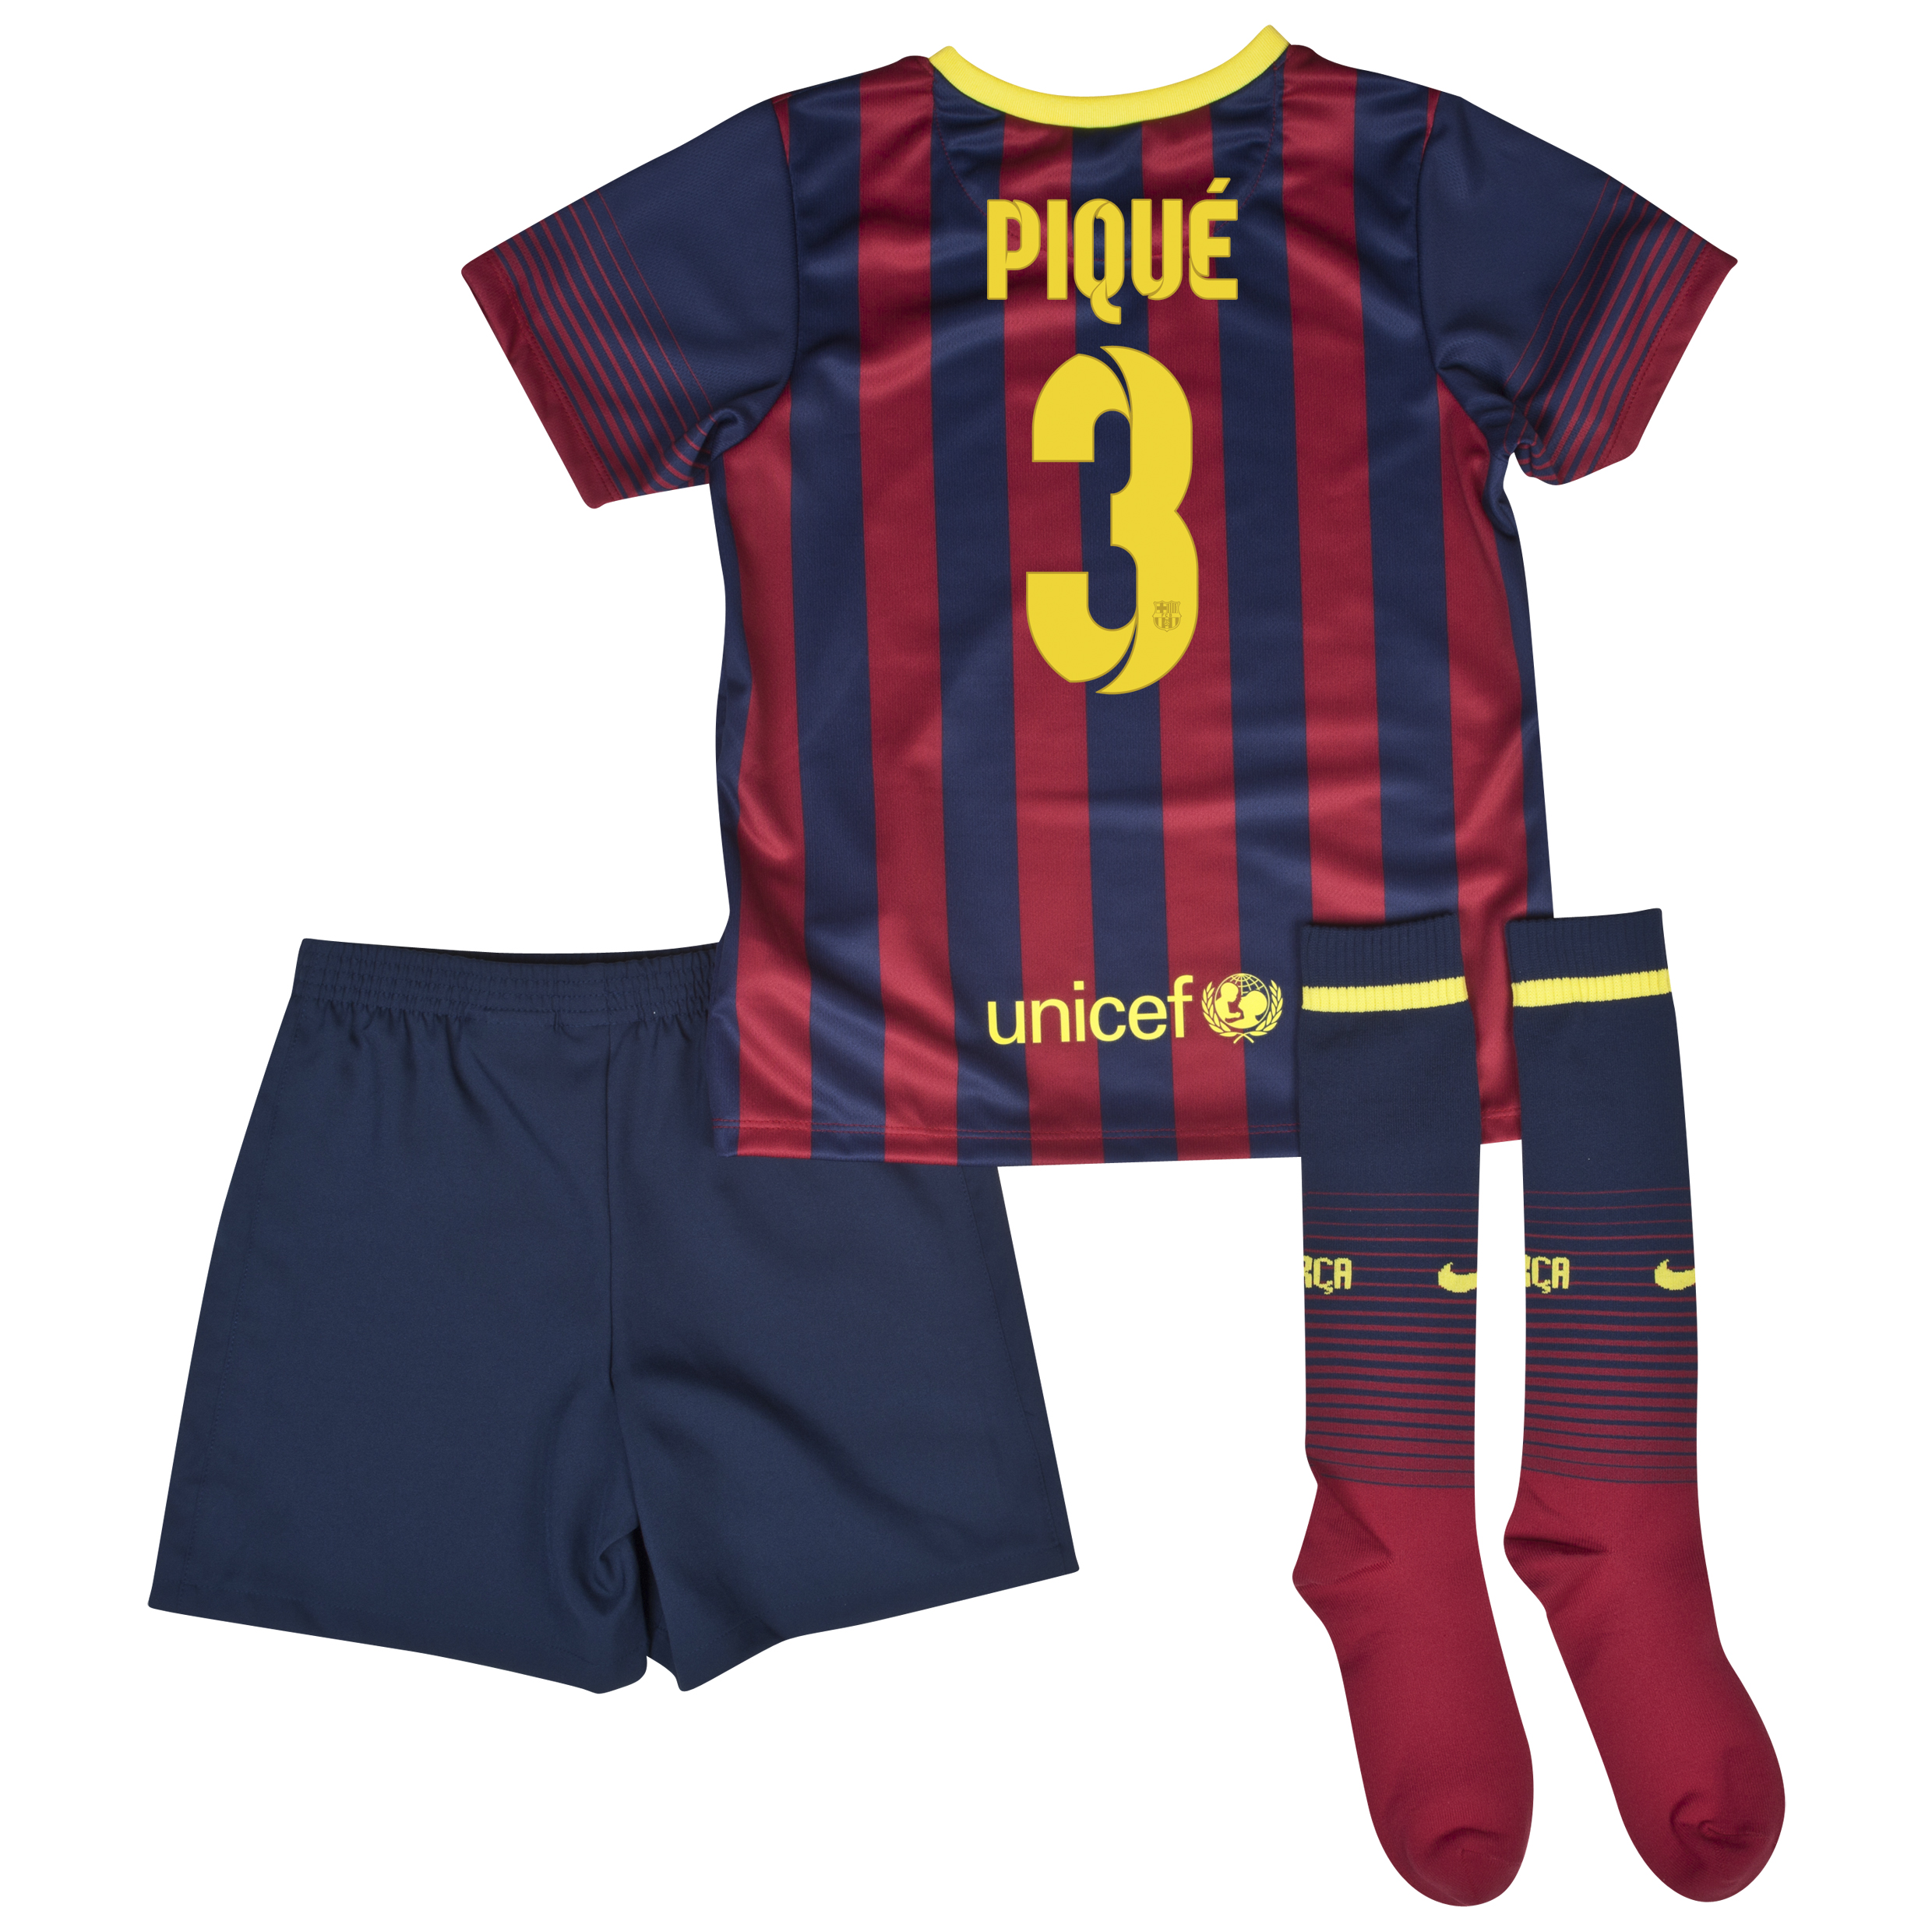 Barcelona Home Kit 2013/14 - Little Boys with Pique 3 printing